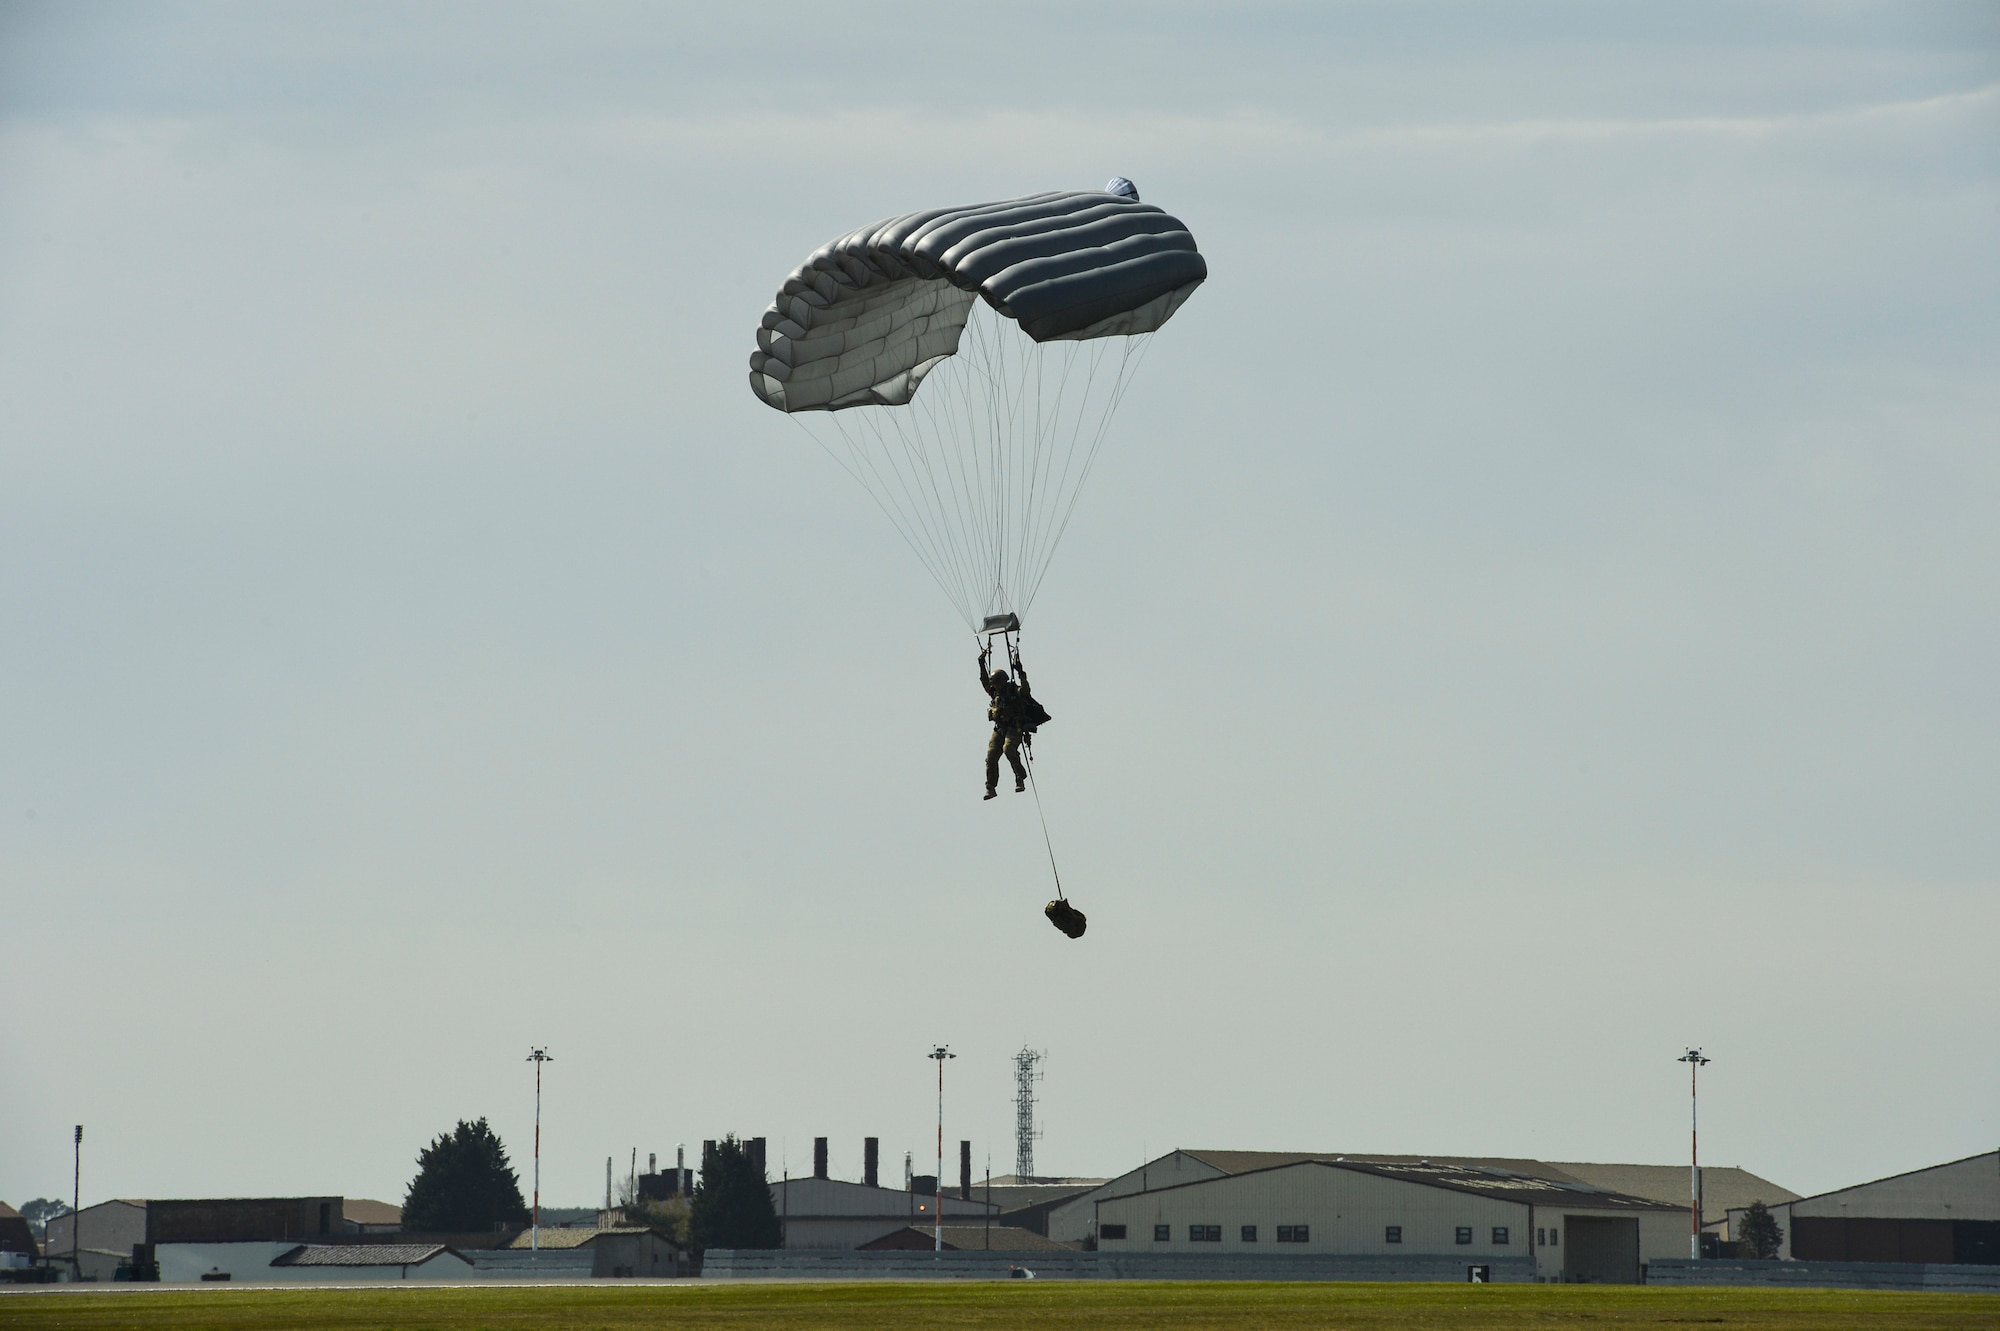 A pararescueman with the 57th Rescue Squadron parachutes onto the flightline at Royal Air Force Lakenheath, England, during a combat search and rescue demonstration conducted April 21, 2016, for a group of Air Force civic leaders, who are unpaid advisers, key communicators and advocates for the Air Force. (U.S. Air Force photo/Tech. Sgt. Joshua DeMotts)